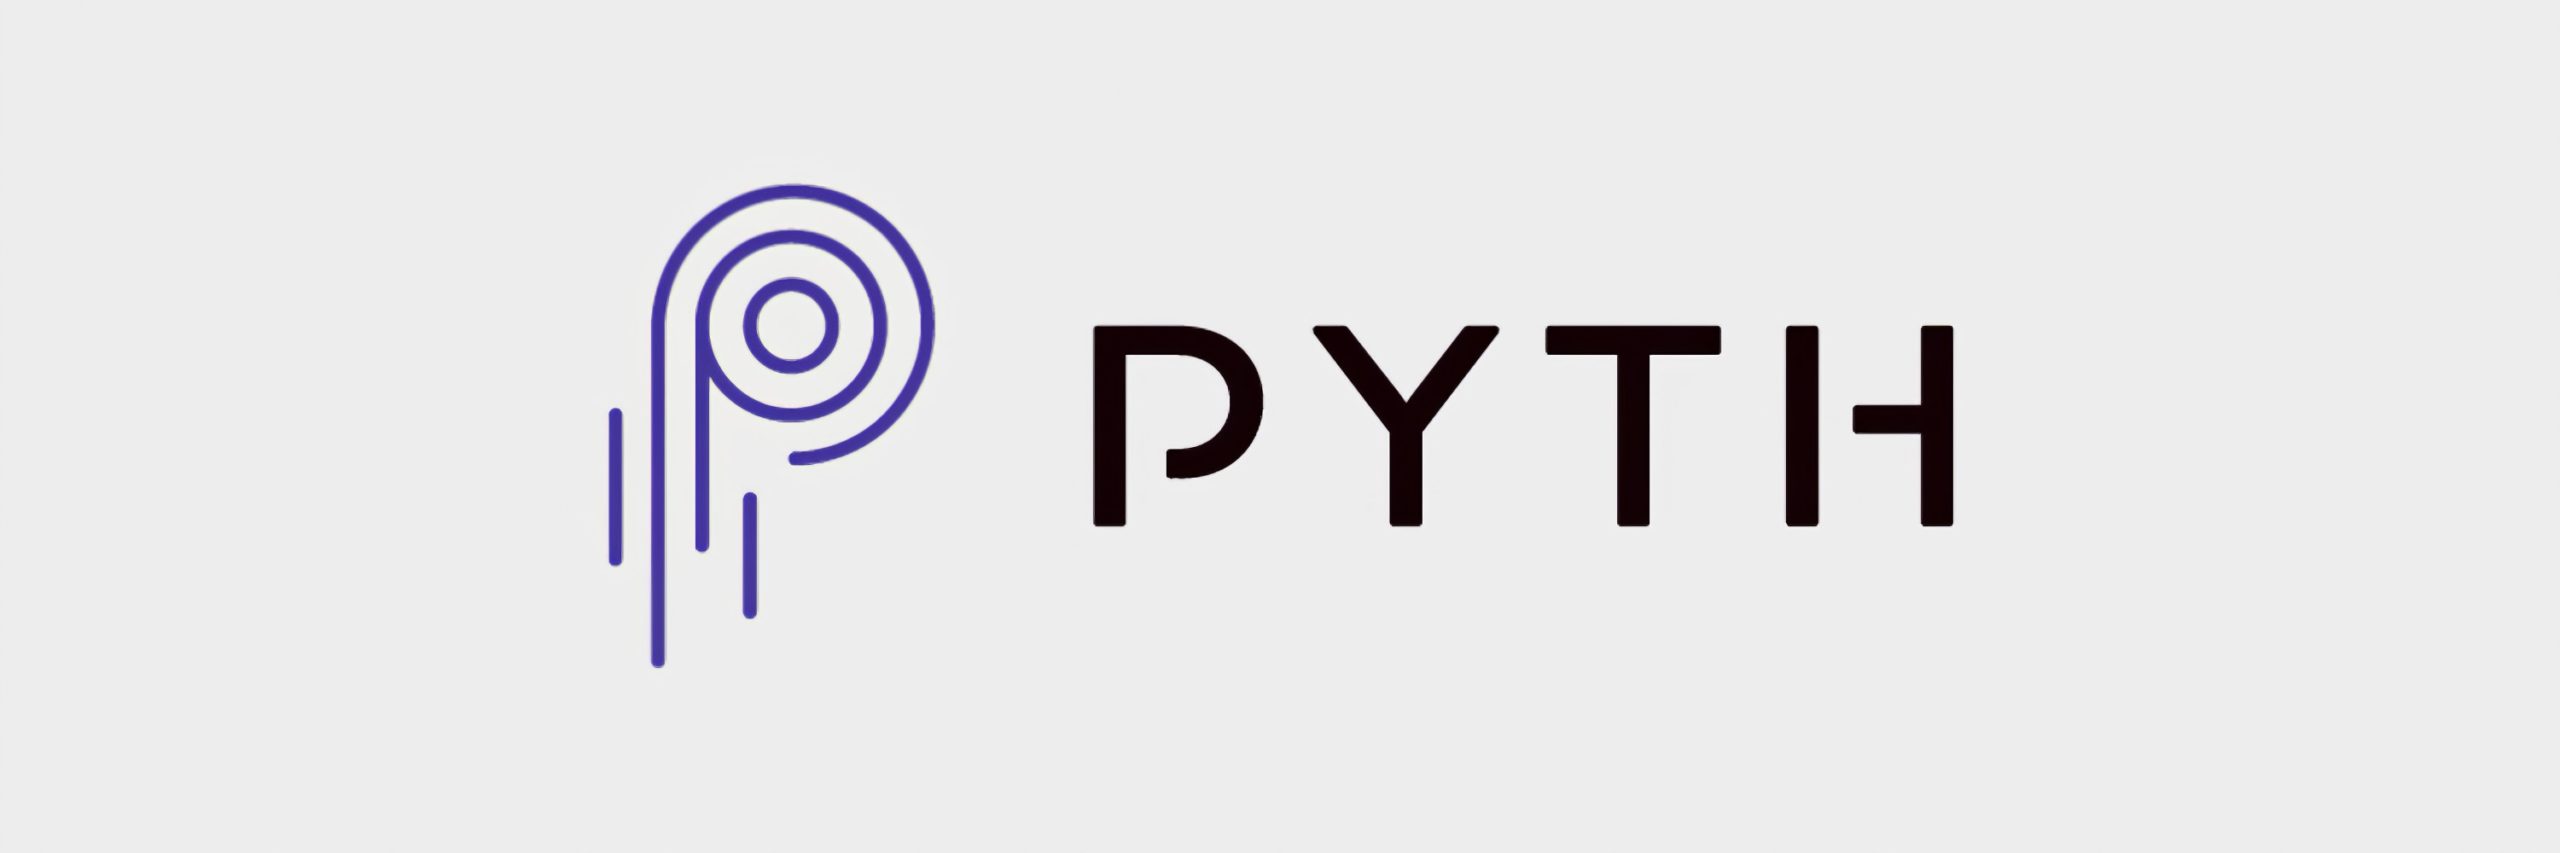 Introducing Pyth Network